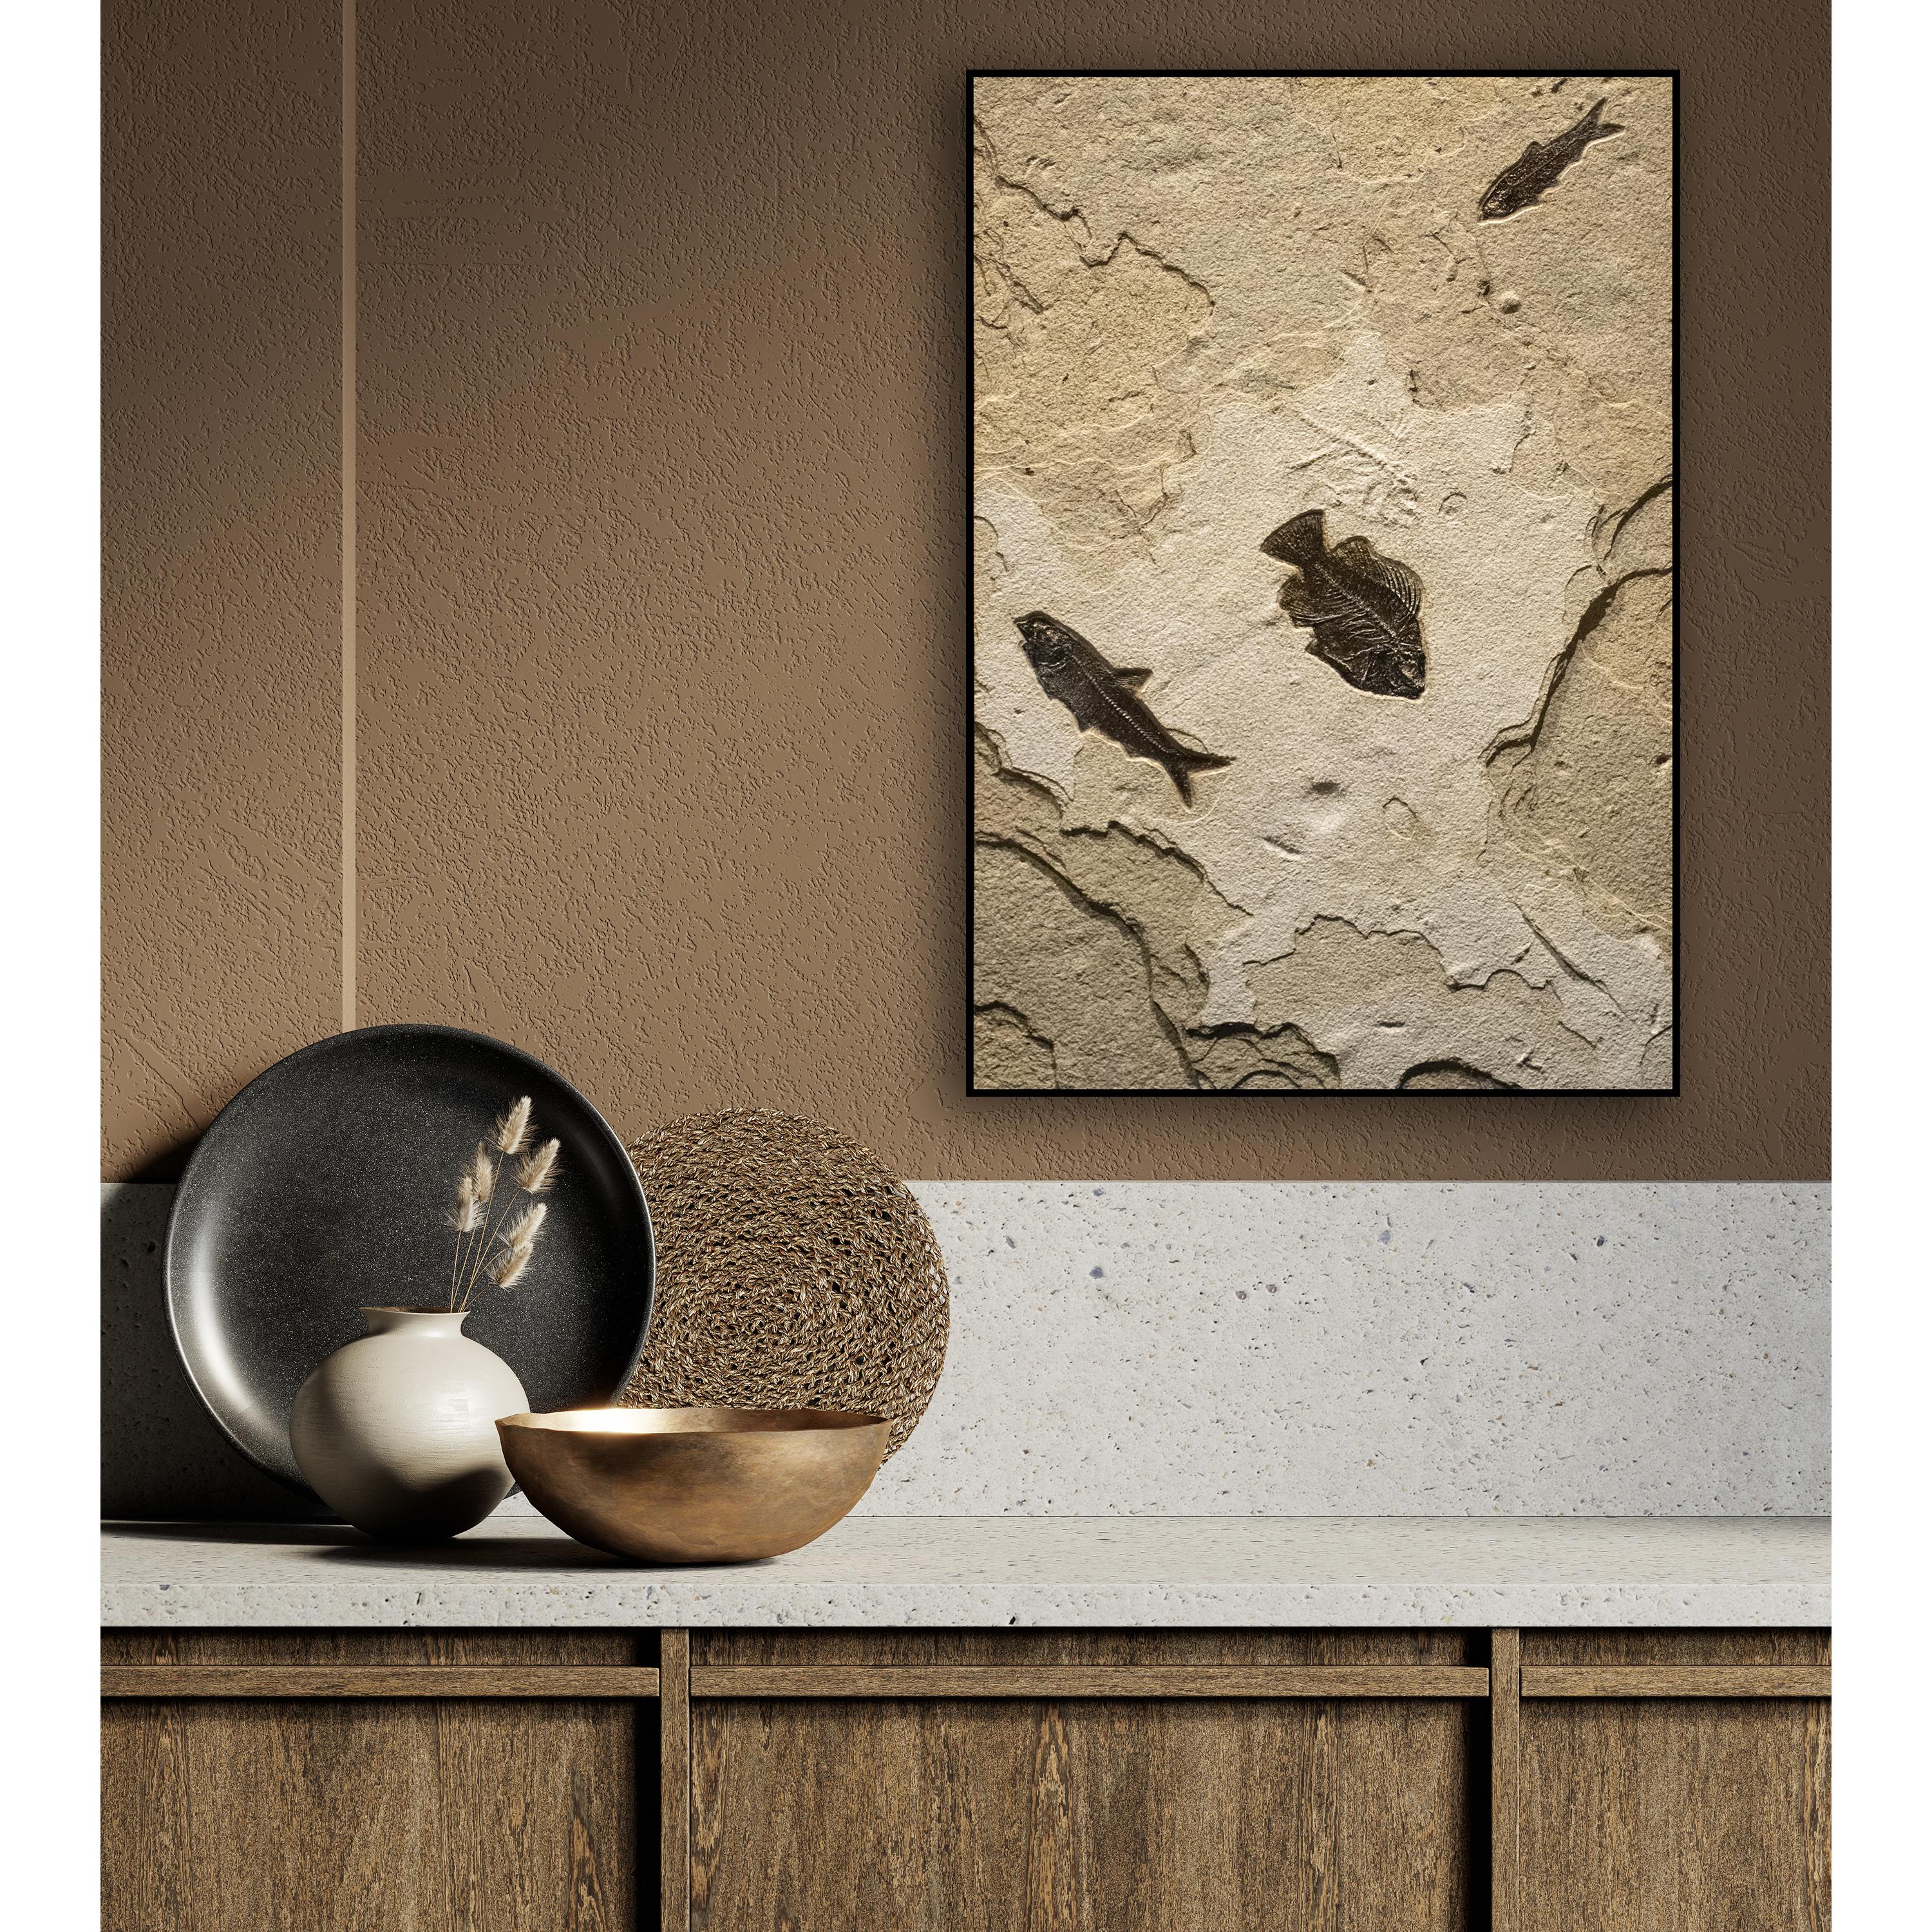 This elegant piece of fossil art features a Cockerellites liops (formerly known as Priscacara) and two Knightia eocaena, all of which are Eocene era fossils dating back about 50 million years. The ancient fish are forever preserved in a beautifully